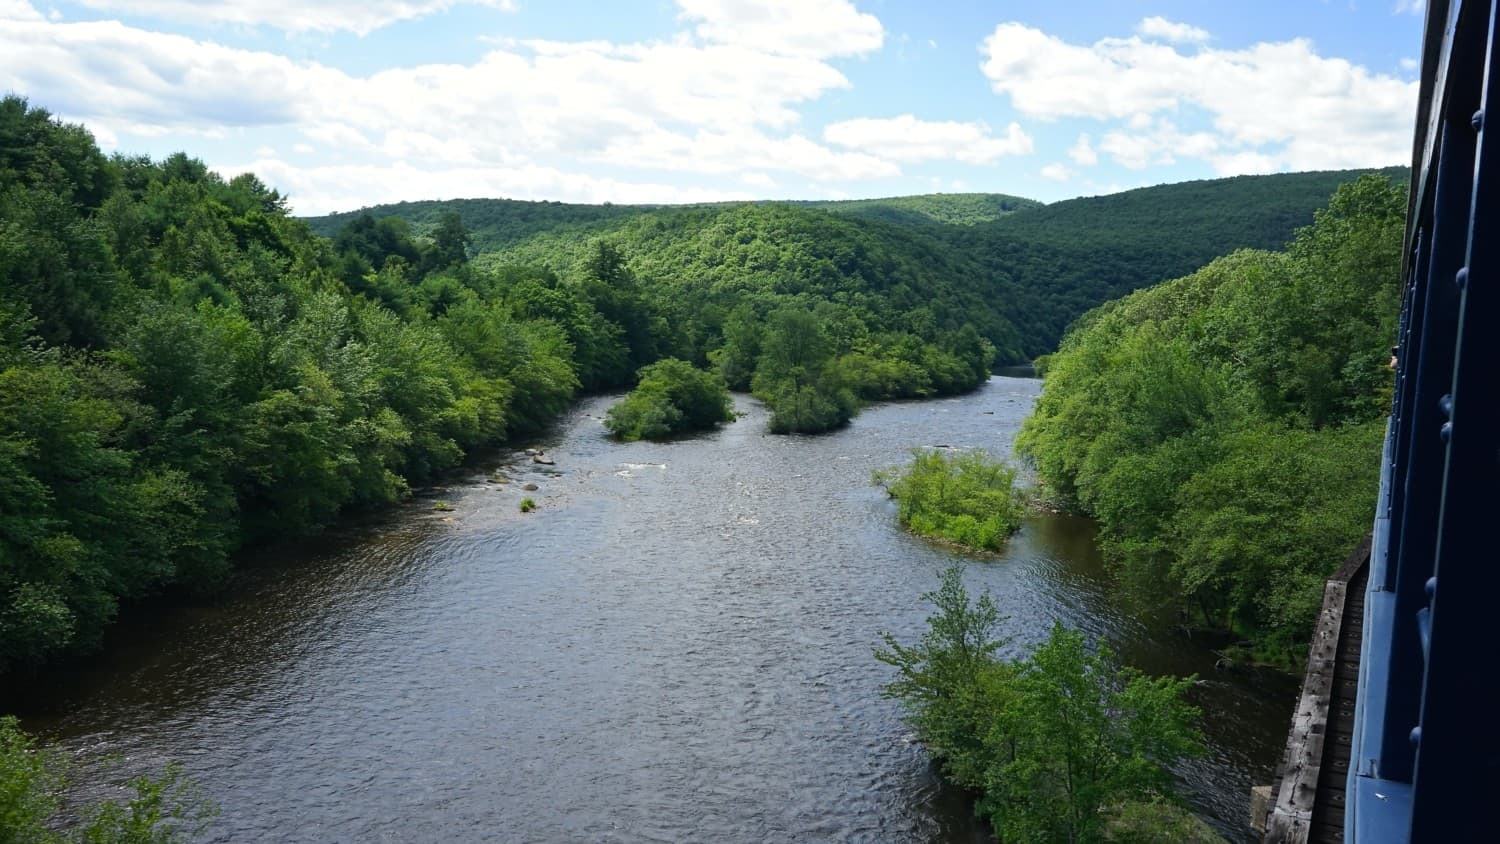 The Lehigh River from the scenic railroad